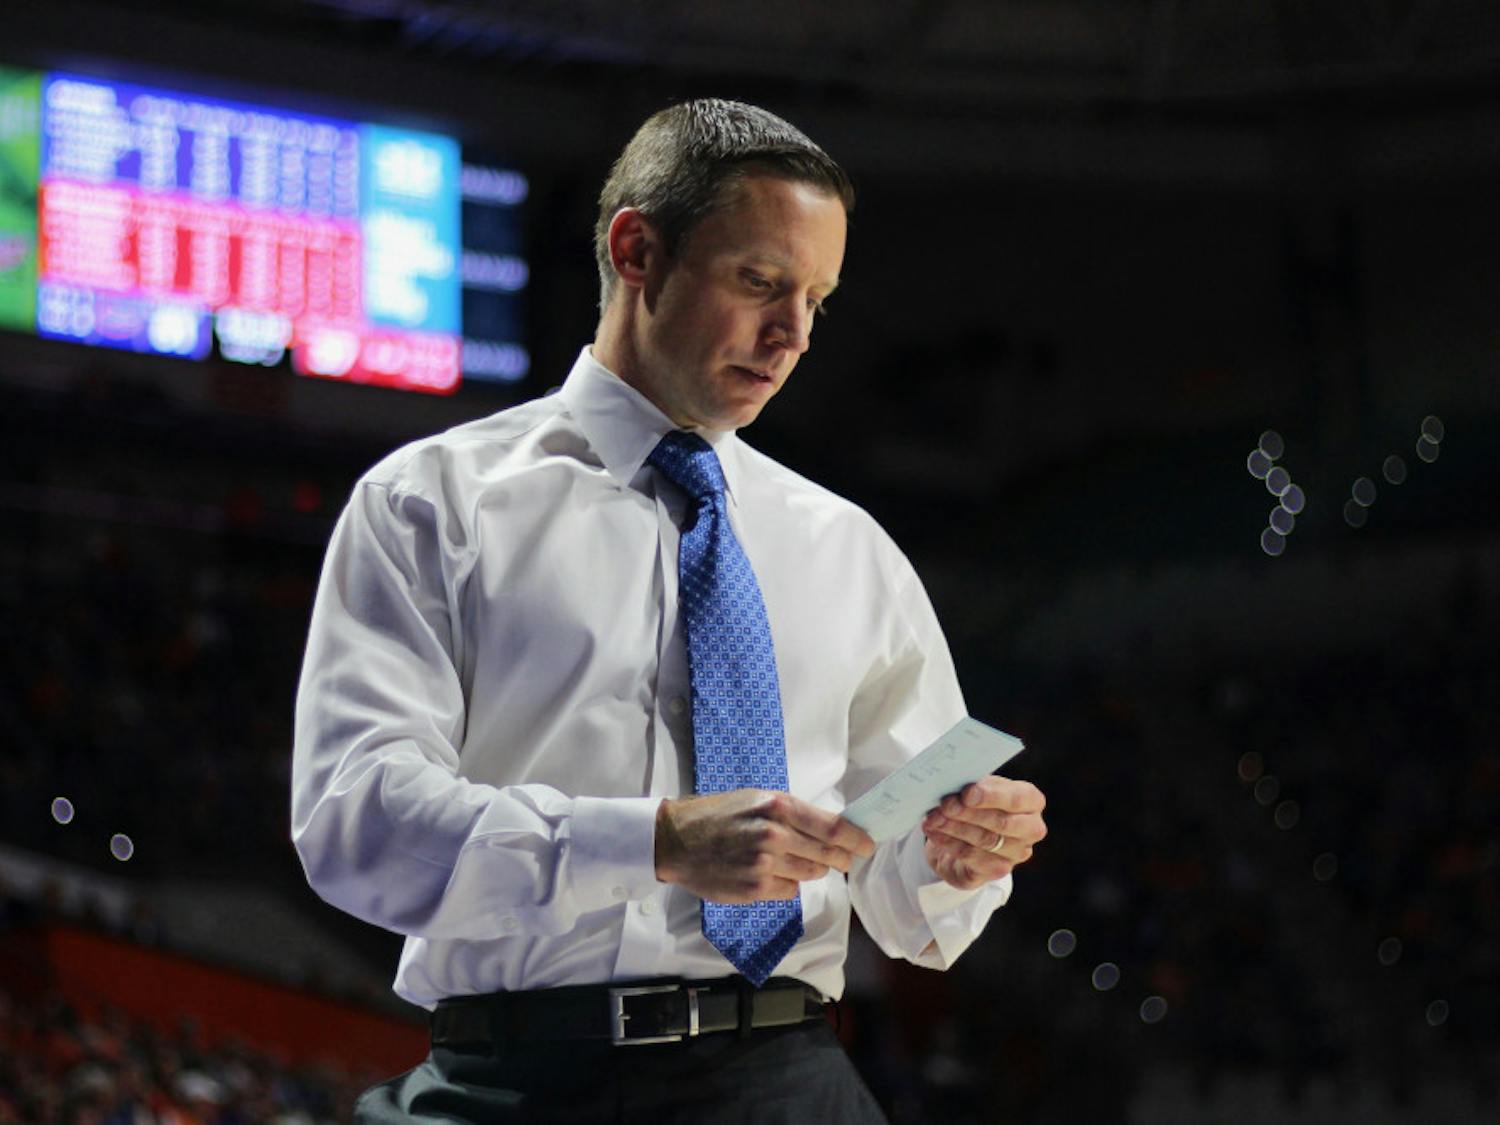 UF coach Mike White has expressed his freshmen have yet to earn his trust to play in tight games or against better opponents. Against Gonzaga, Mike Okauru saw 10 minutes of playing time and Deaundrae Ballard saw just seven.